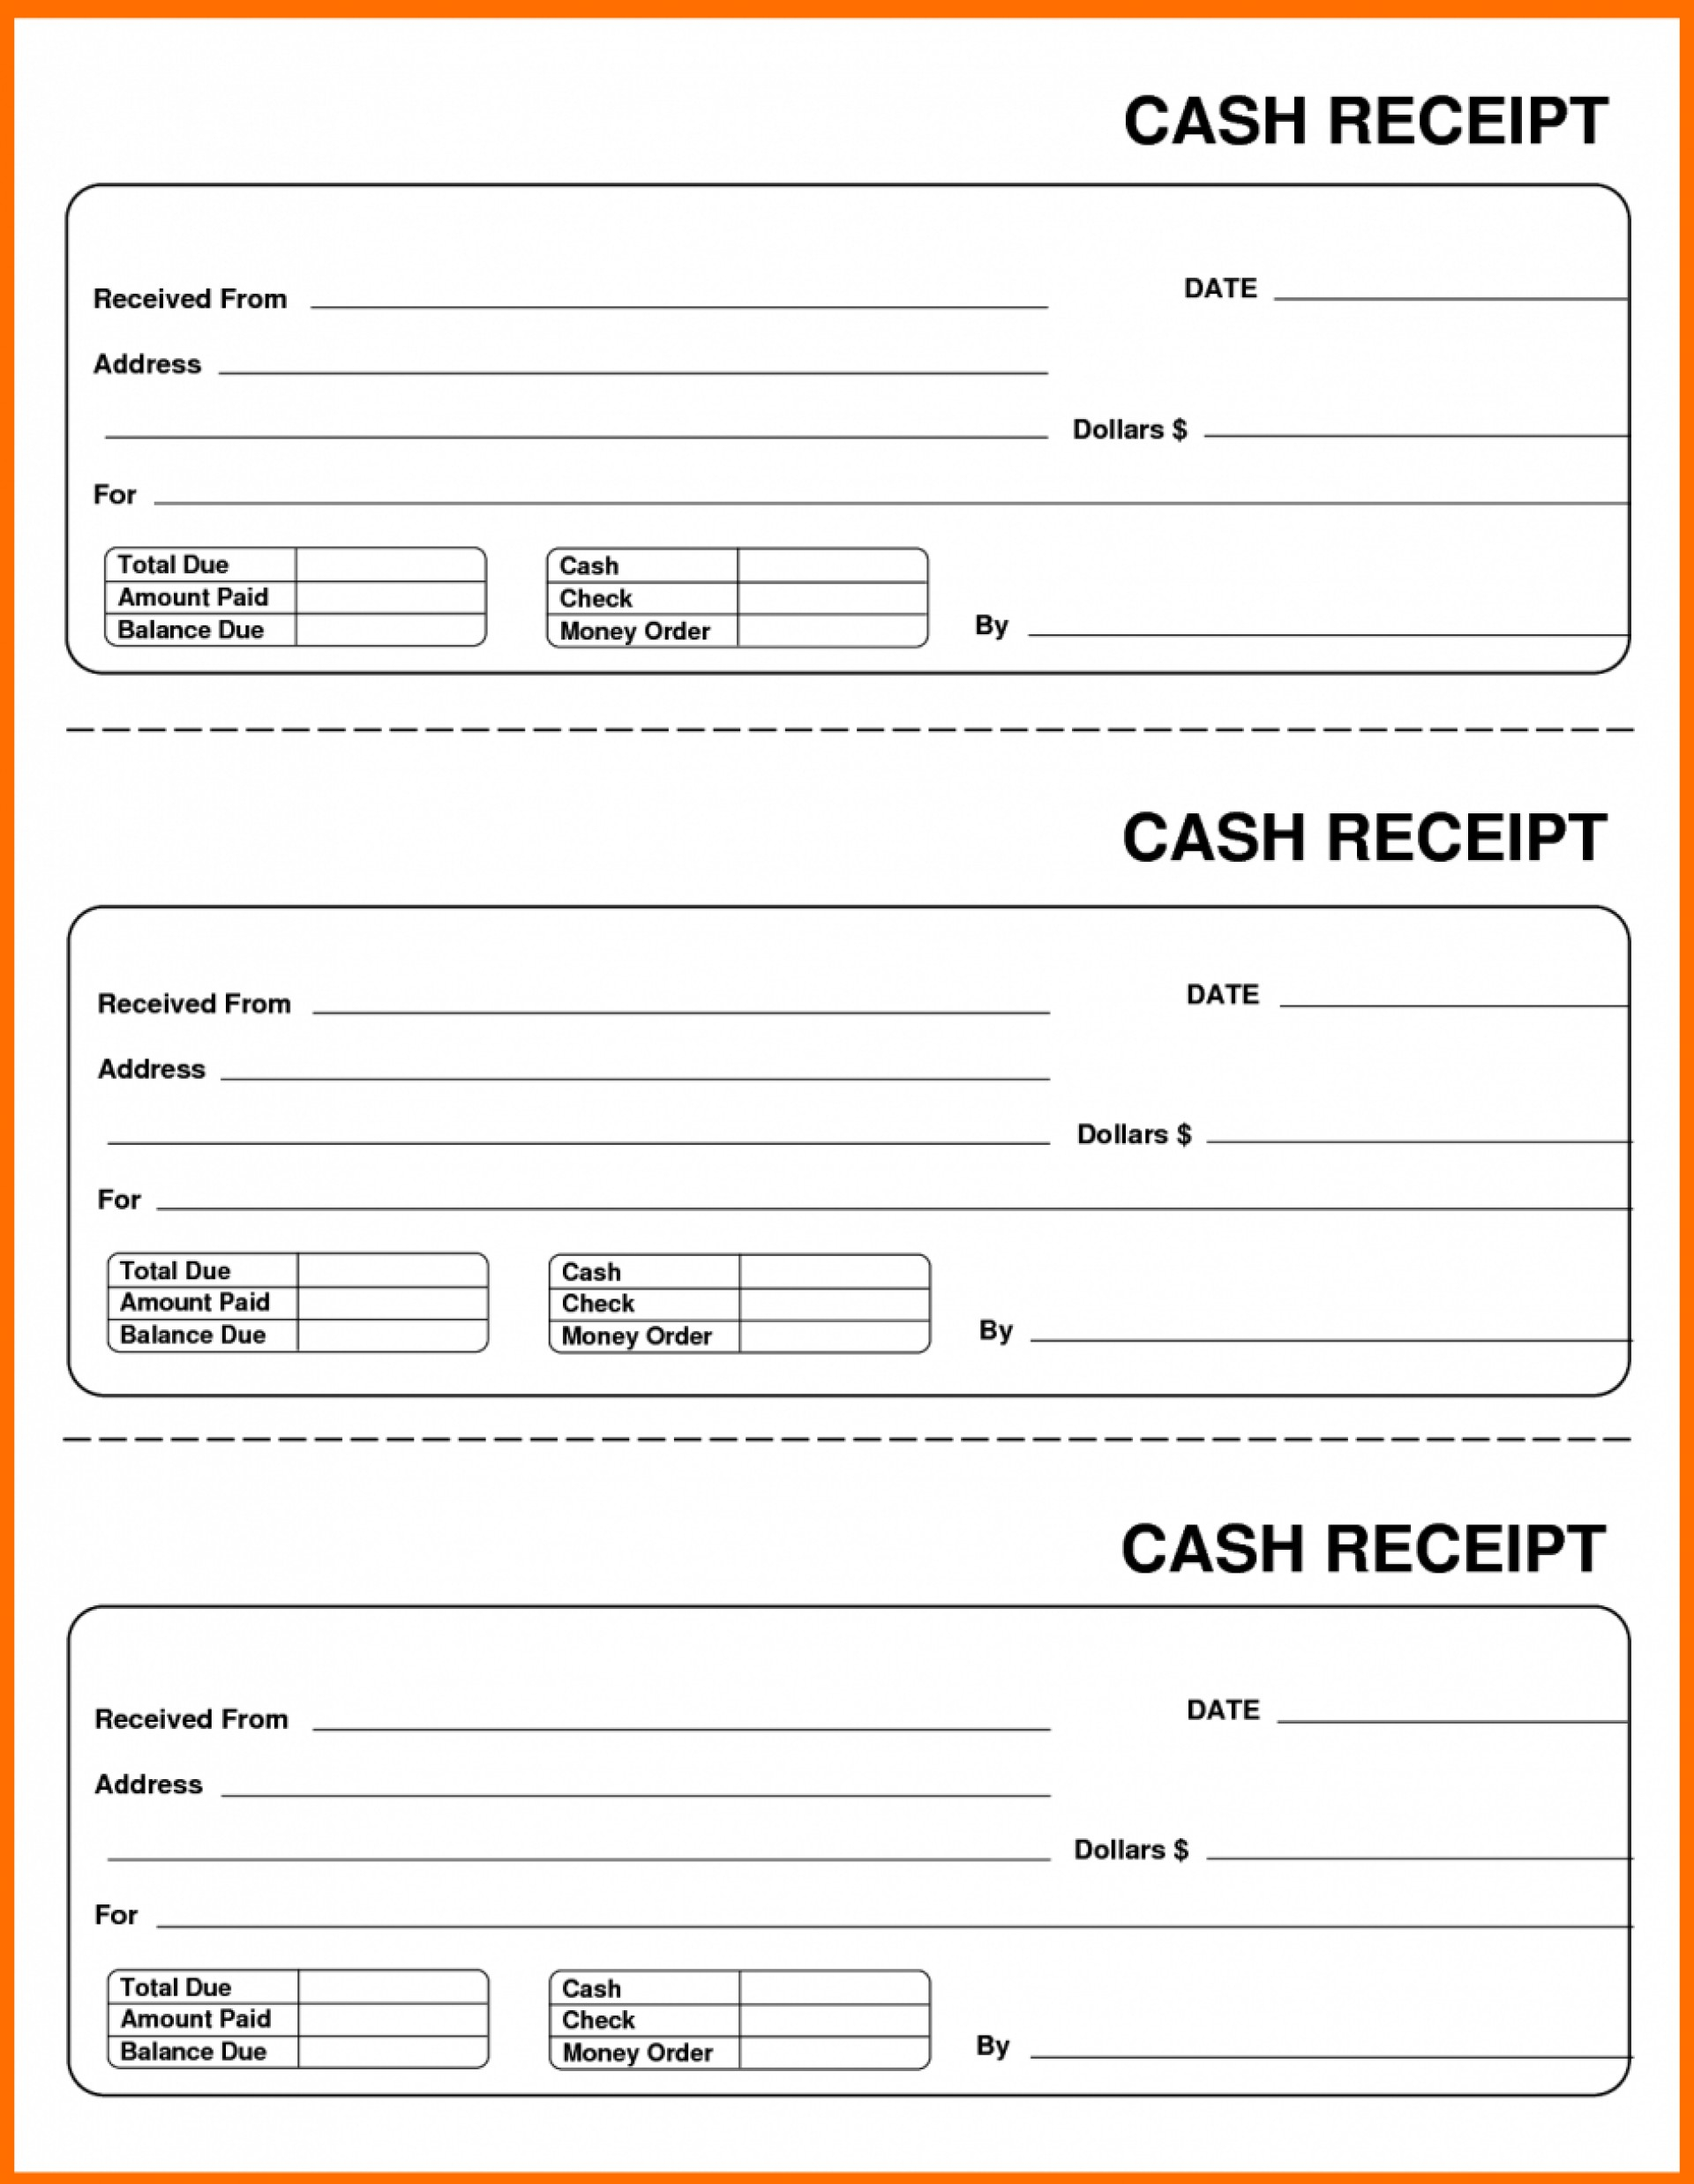 Lodge Billrmat Bahamas Schools Invoice Book Excel Design With Regard To How To Create A Book Template In Word